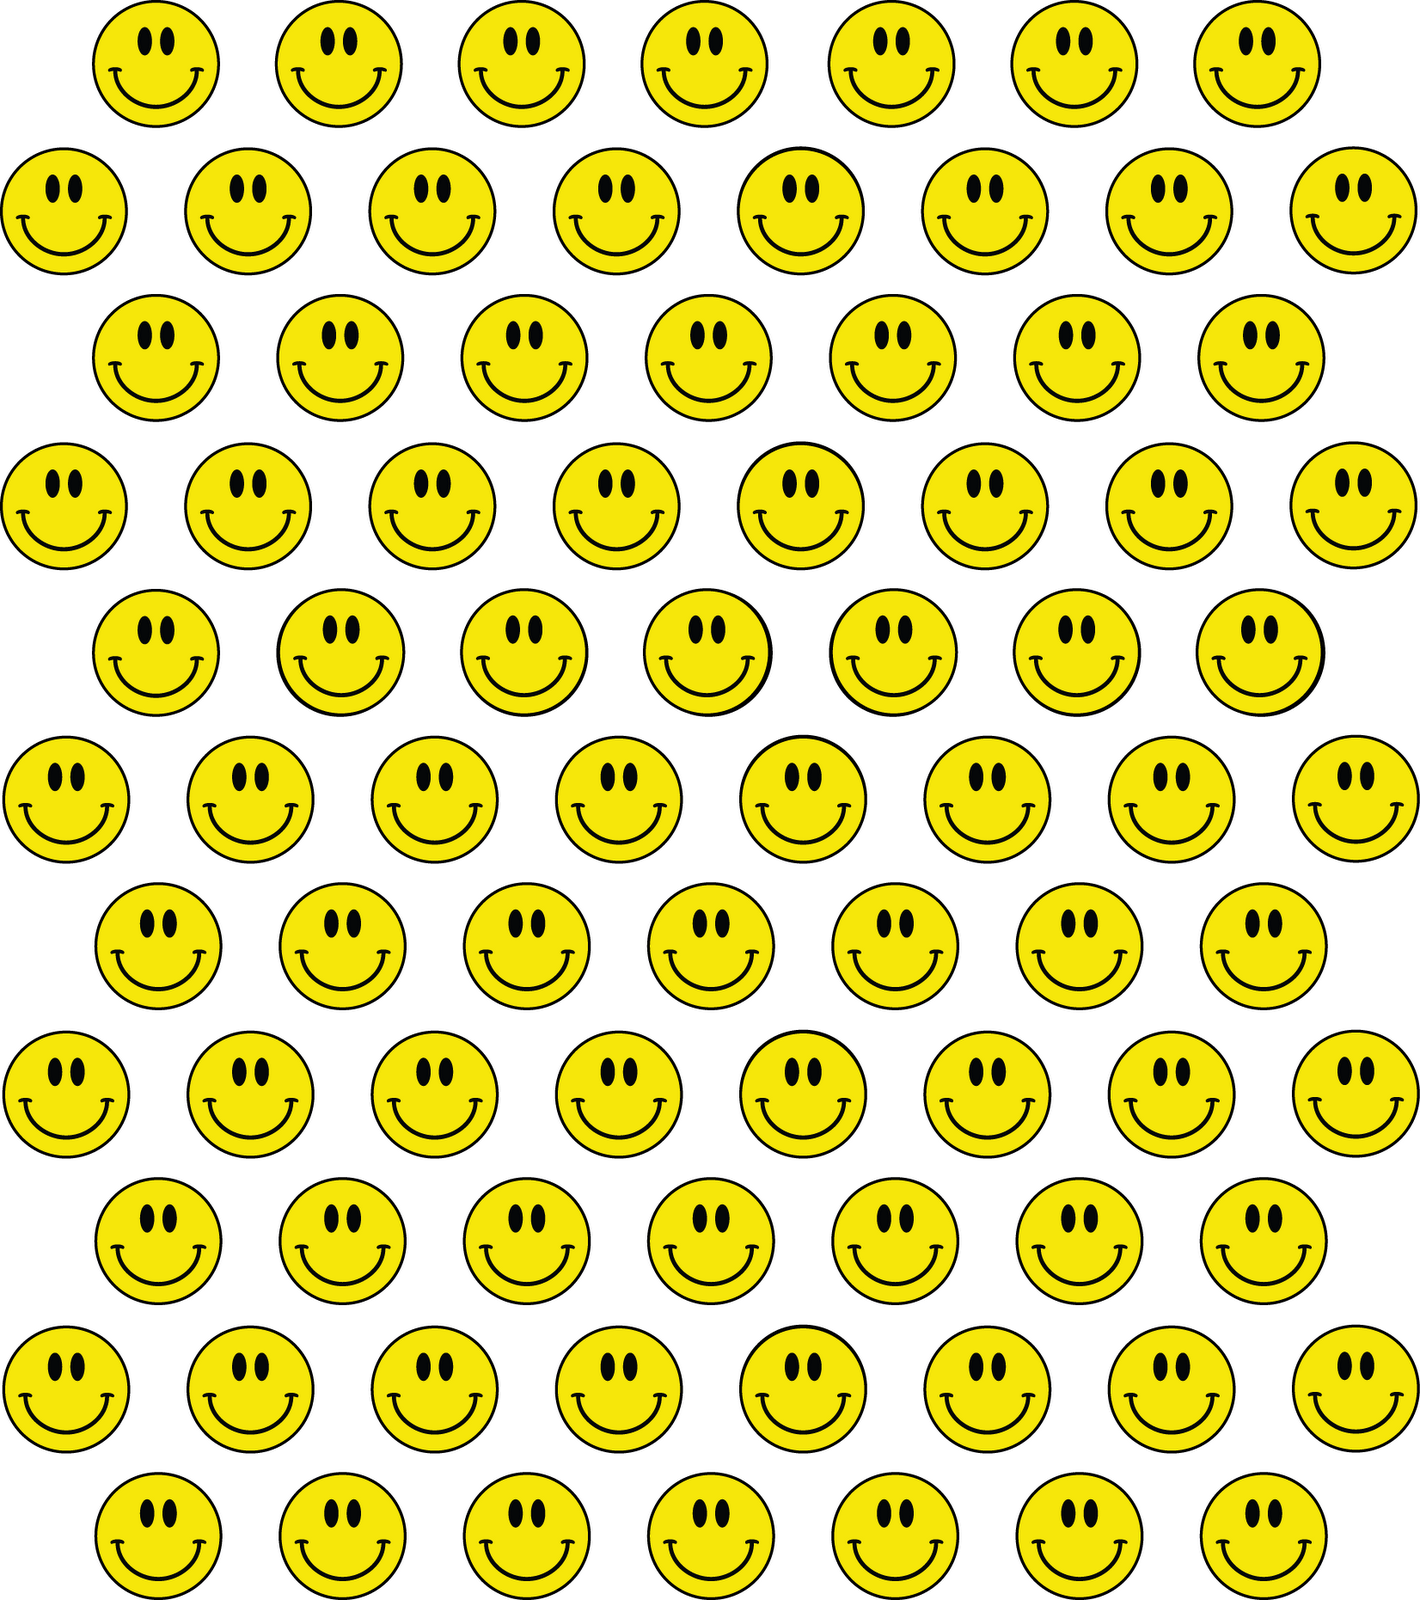 Smiley Face Image Google Search S